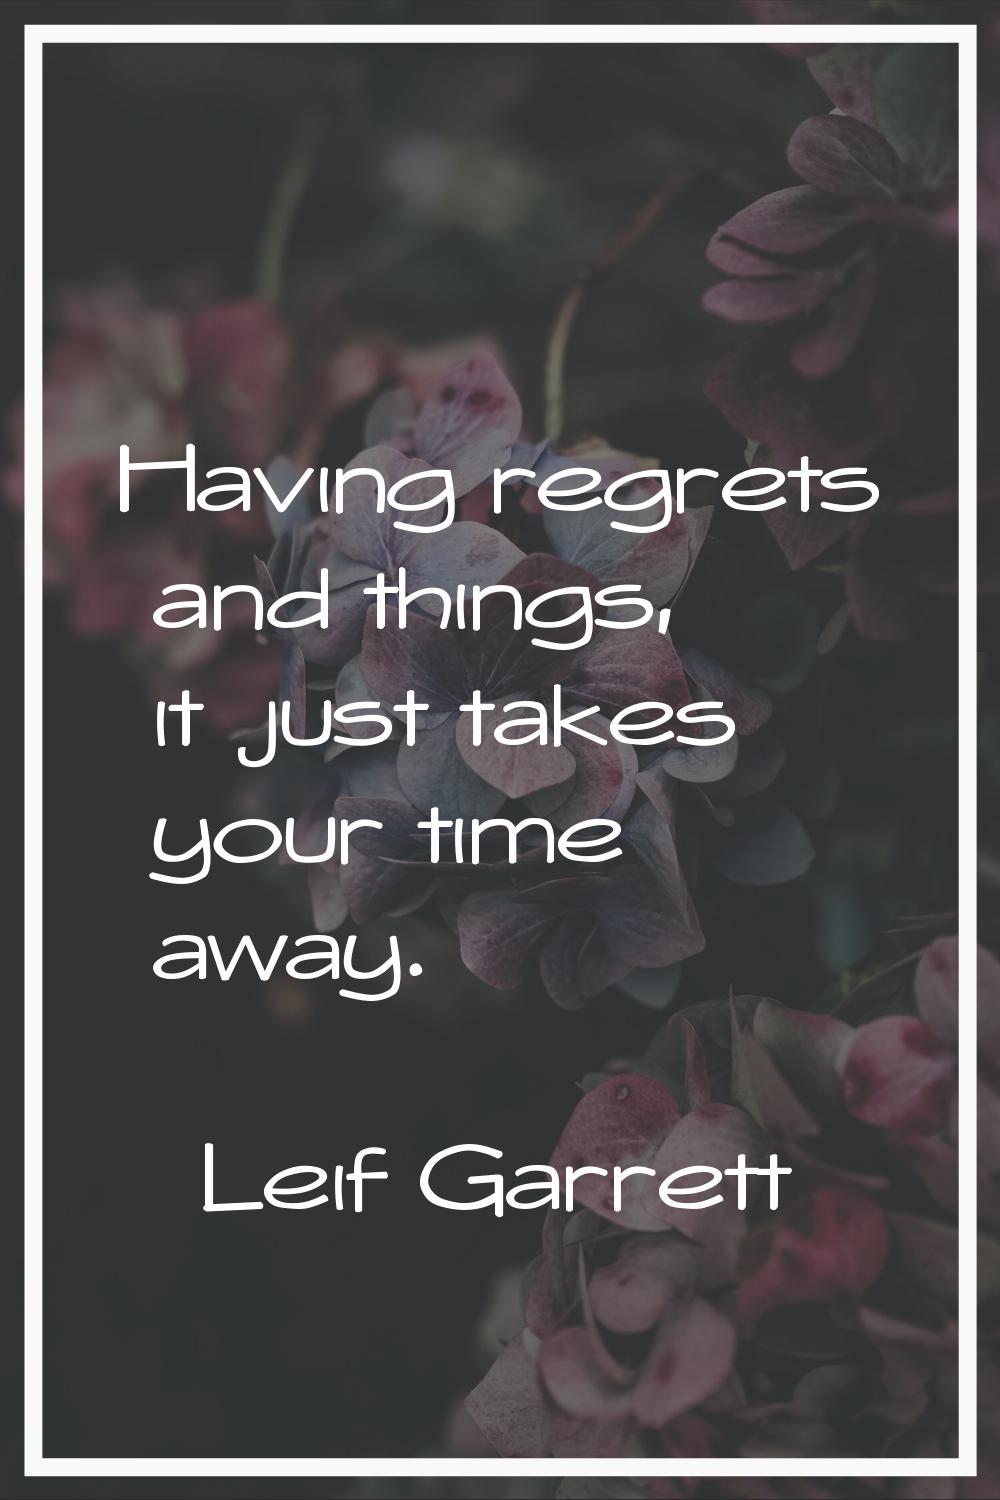 Having regrets and things, it just takes your time away.